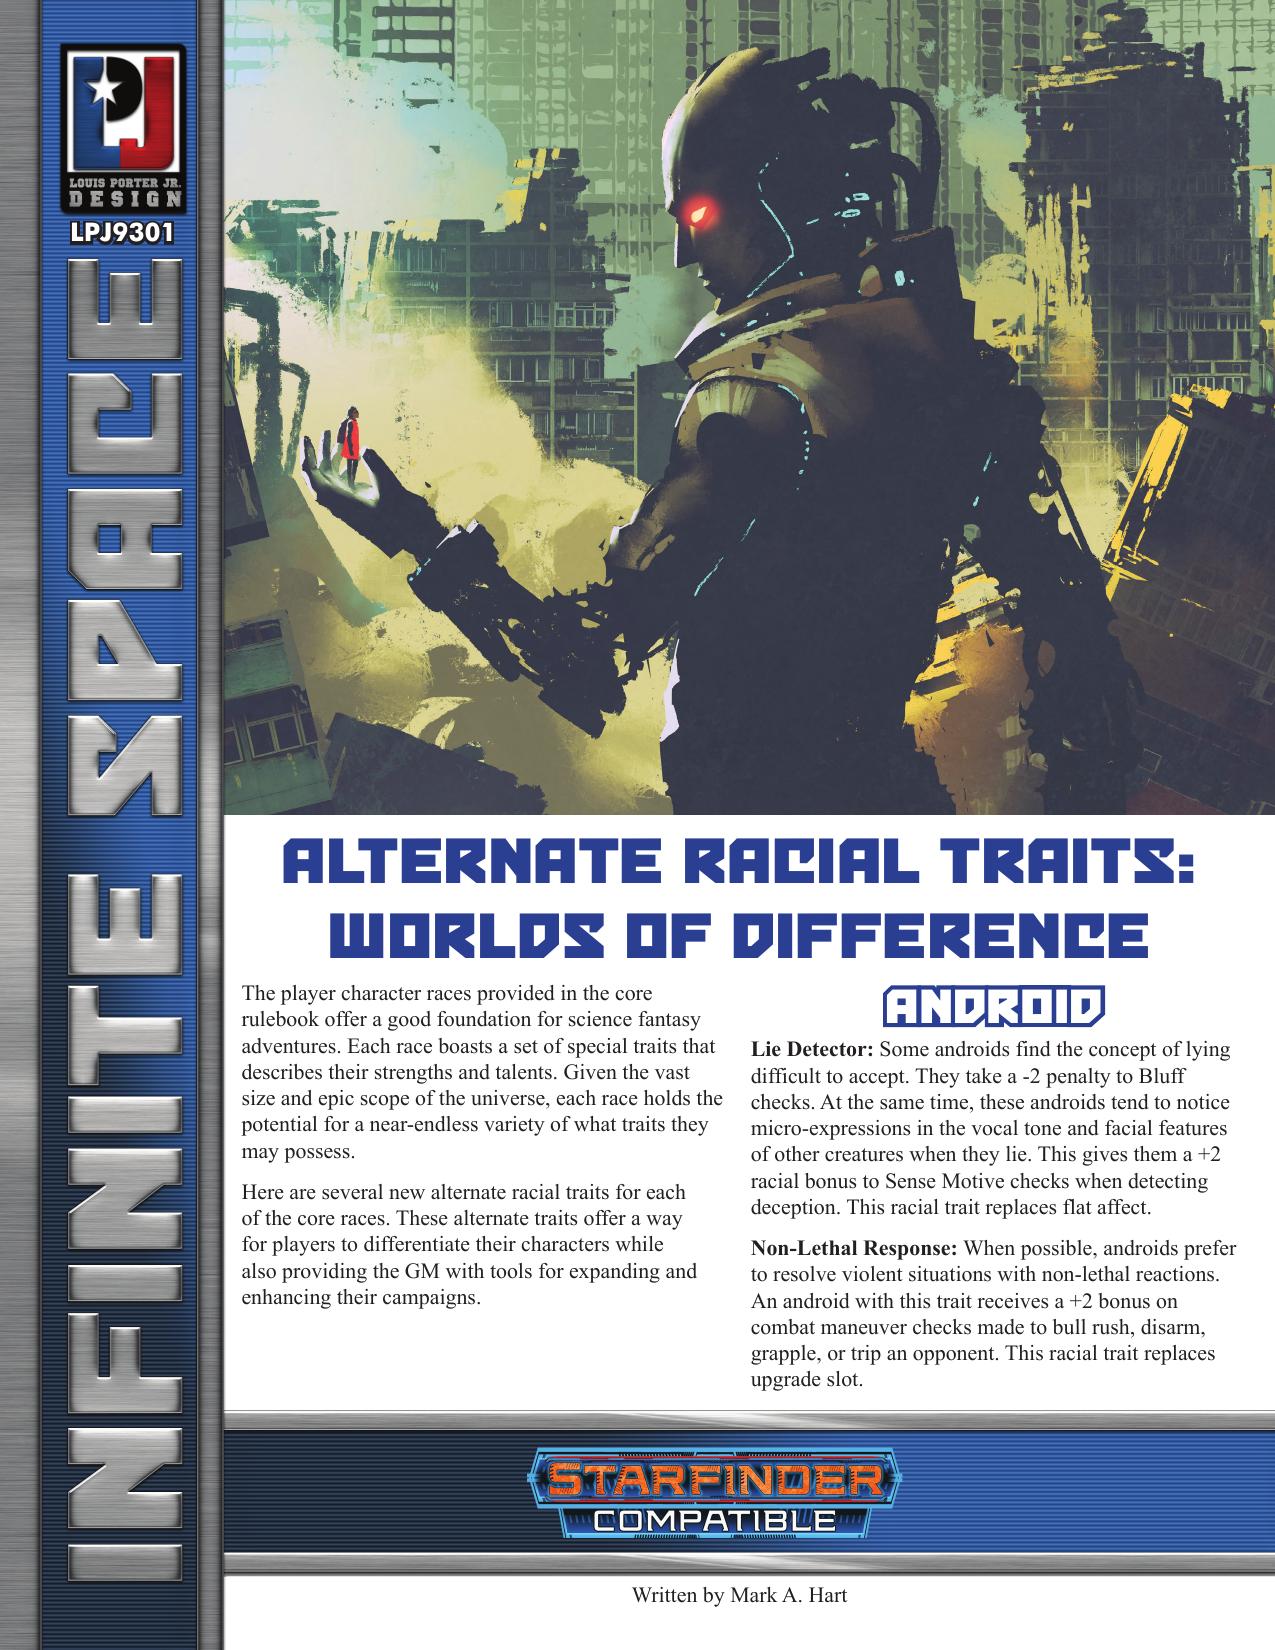 Alternate Racial Traits Worlds of Difference